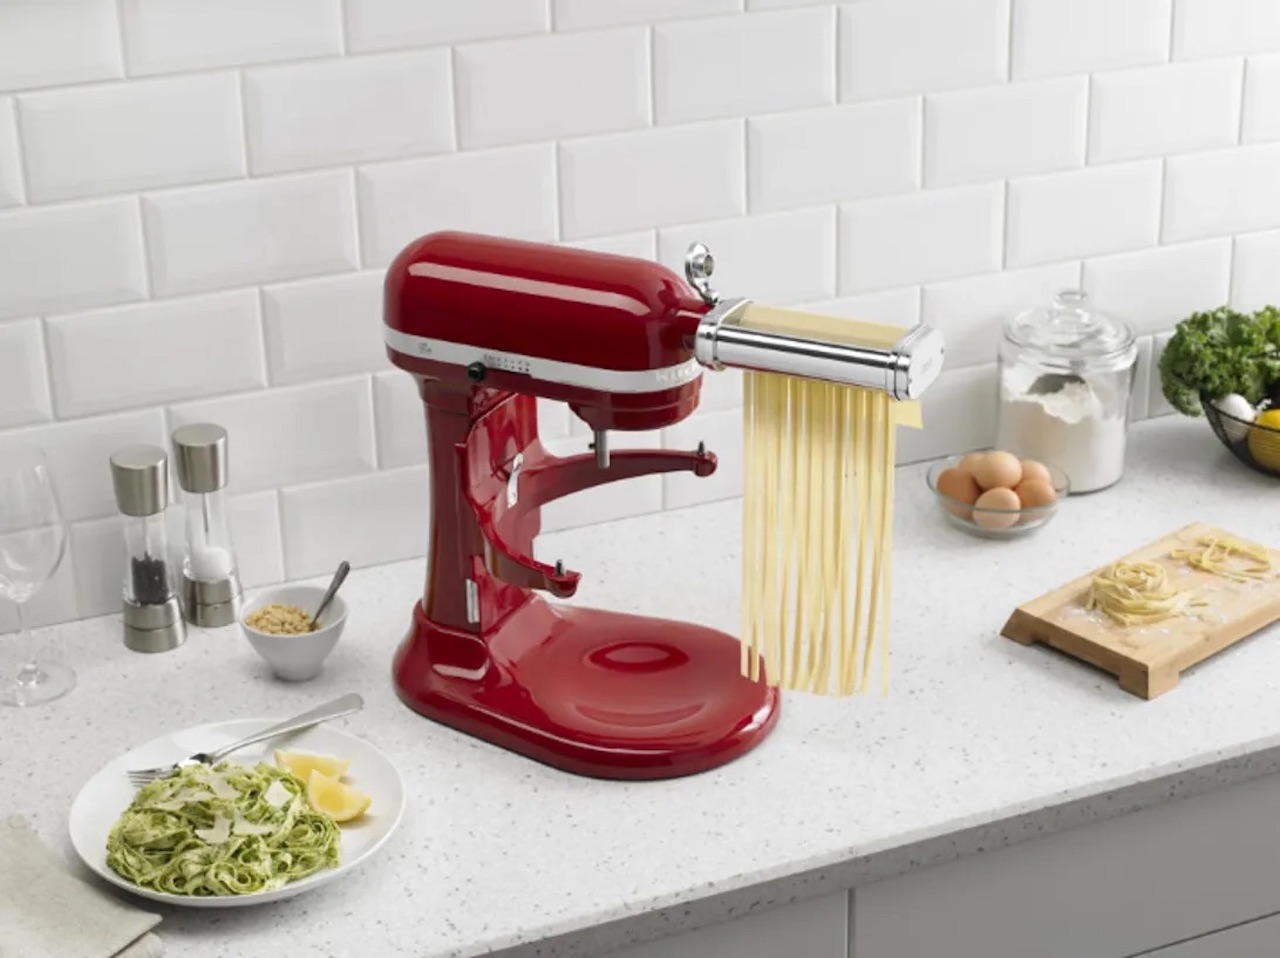 https://storables.com/wp-content/uploads/2023/07/10-best-kitchen-aid-pasta-attachment-for-stand-mixer-for-2023-1690184071.jpeg